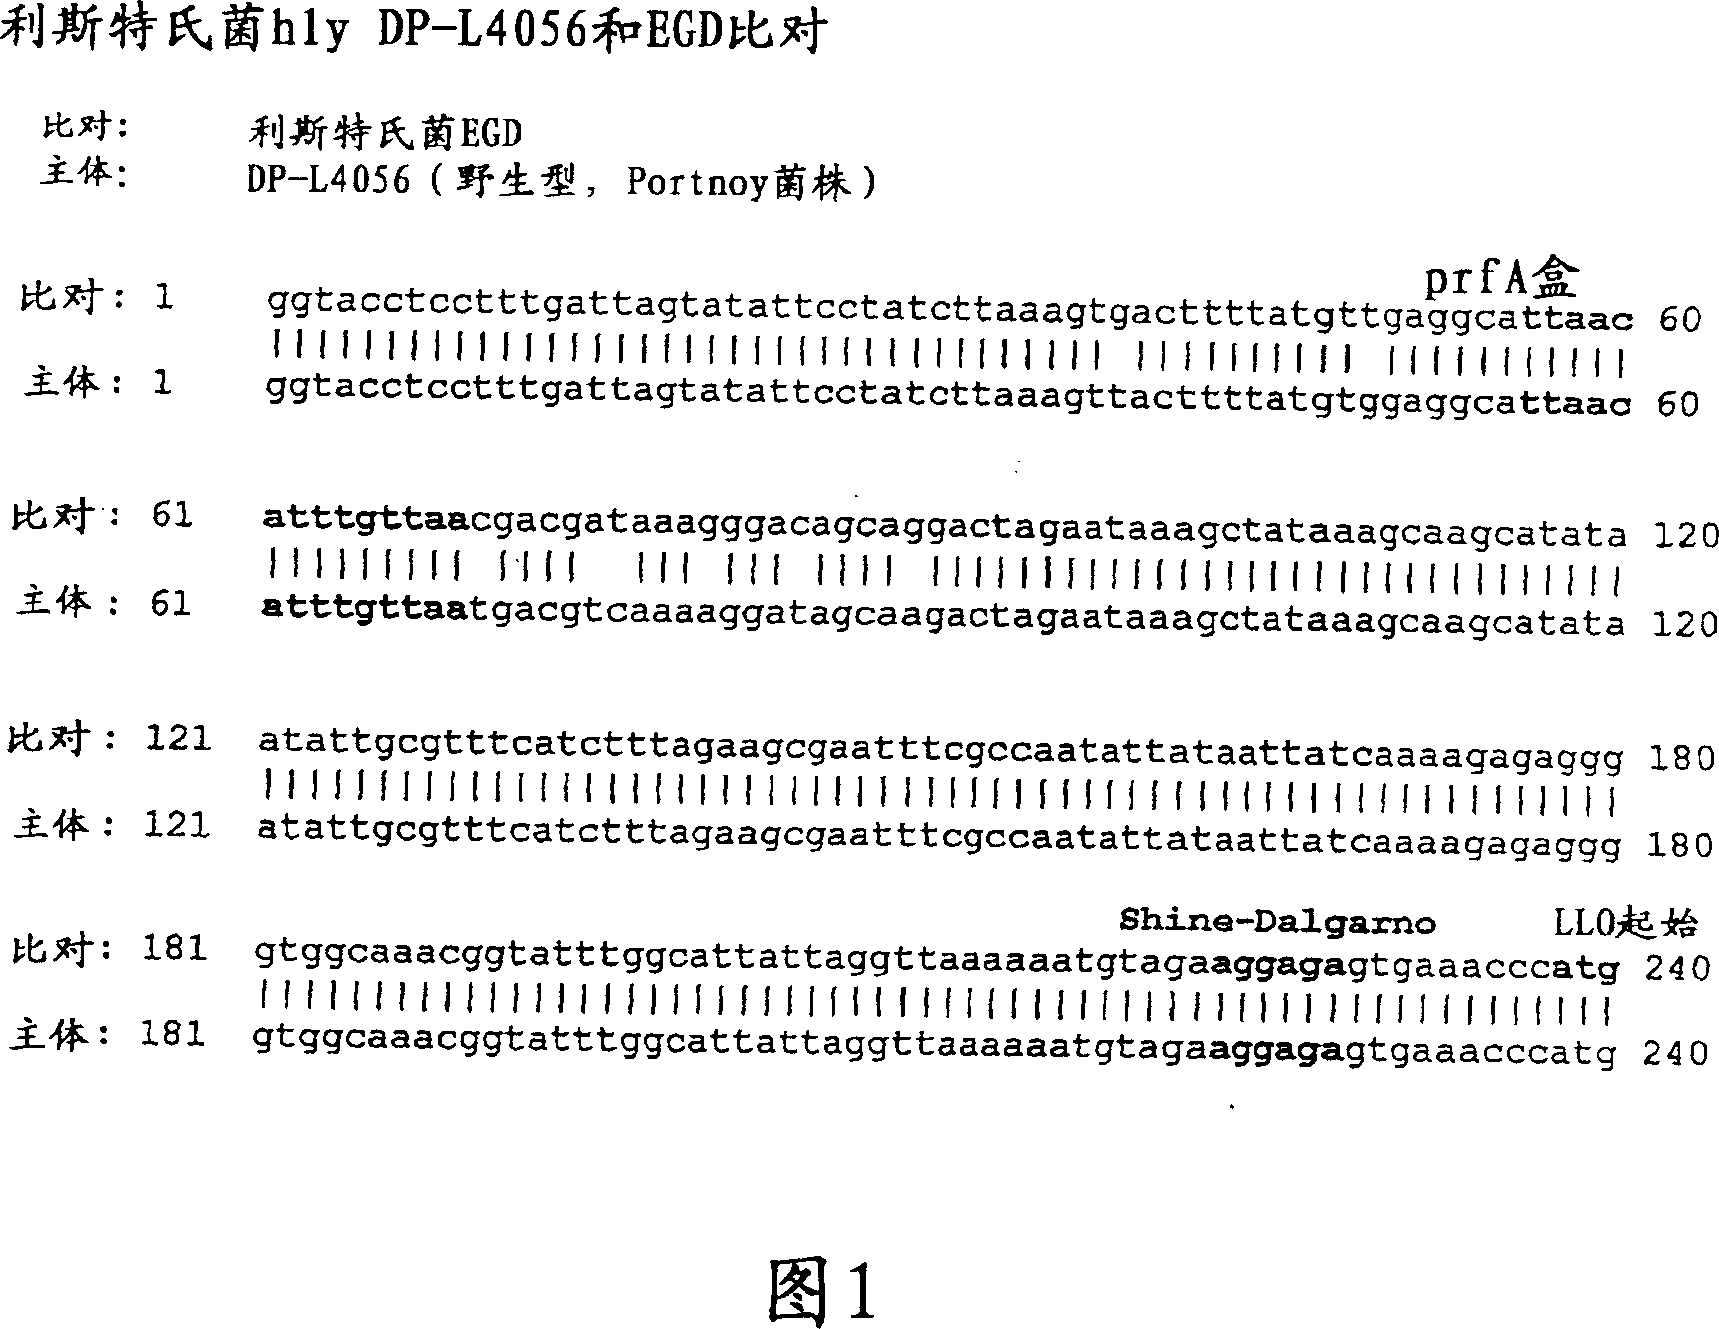 Recombinant nucleic acid molecules, expression cassettes, and bacteria, and methods of use thereof